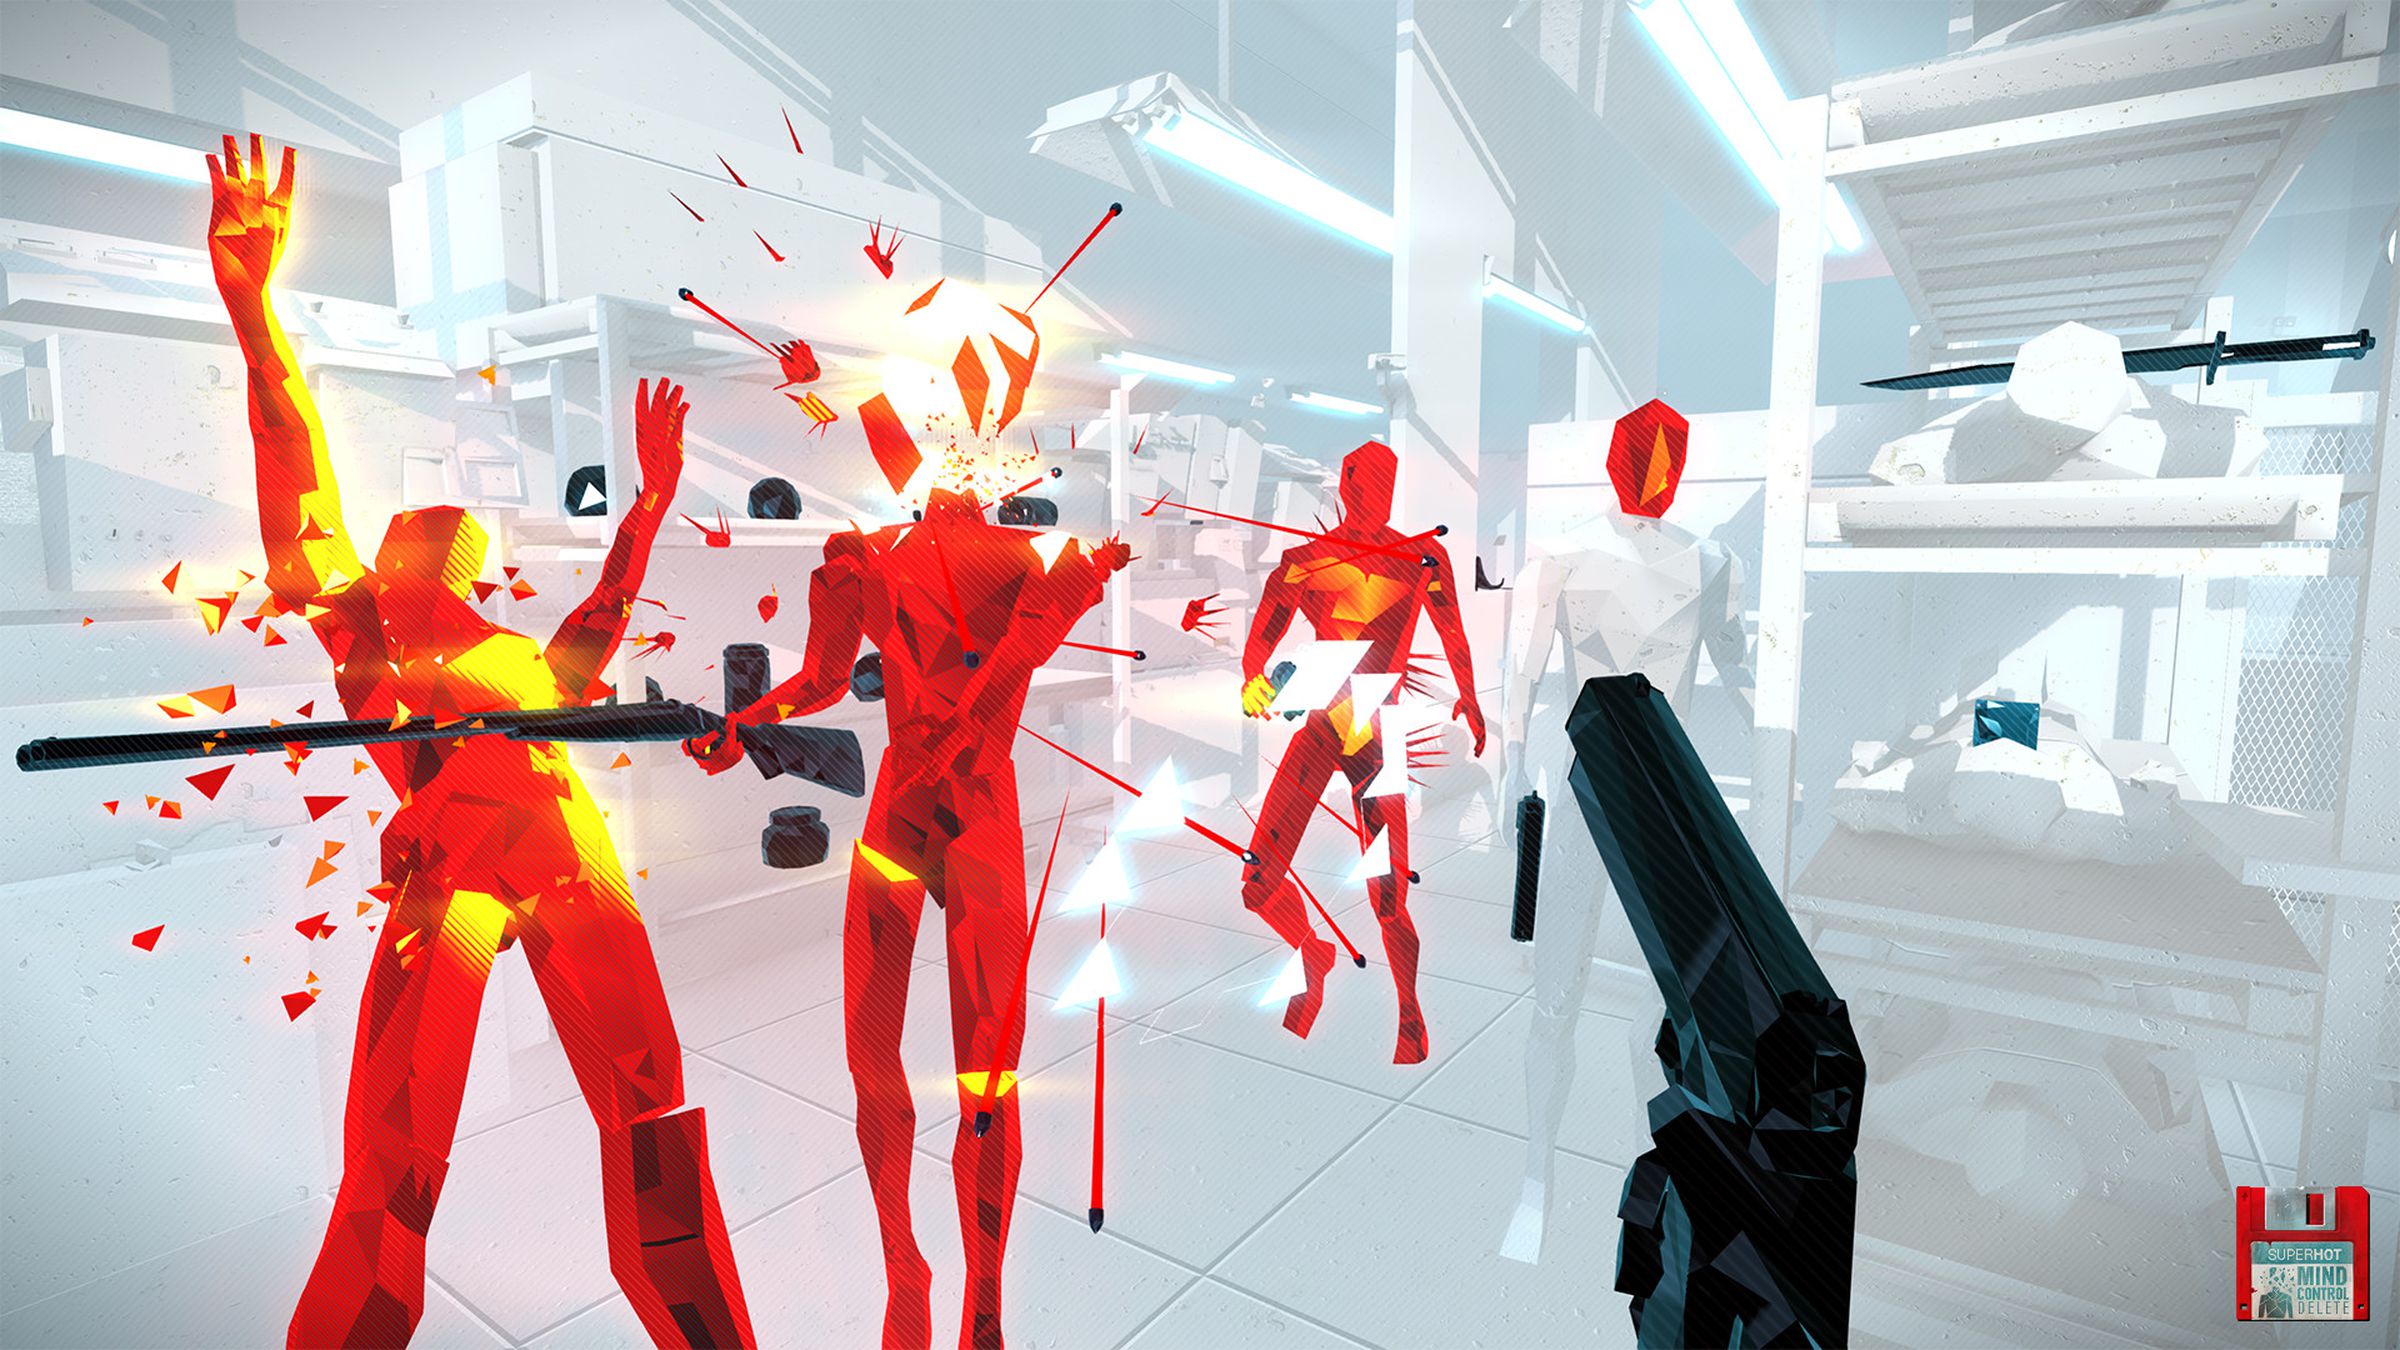 Red figures shooting and exploding on a white background.